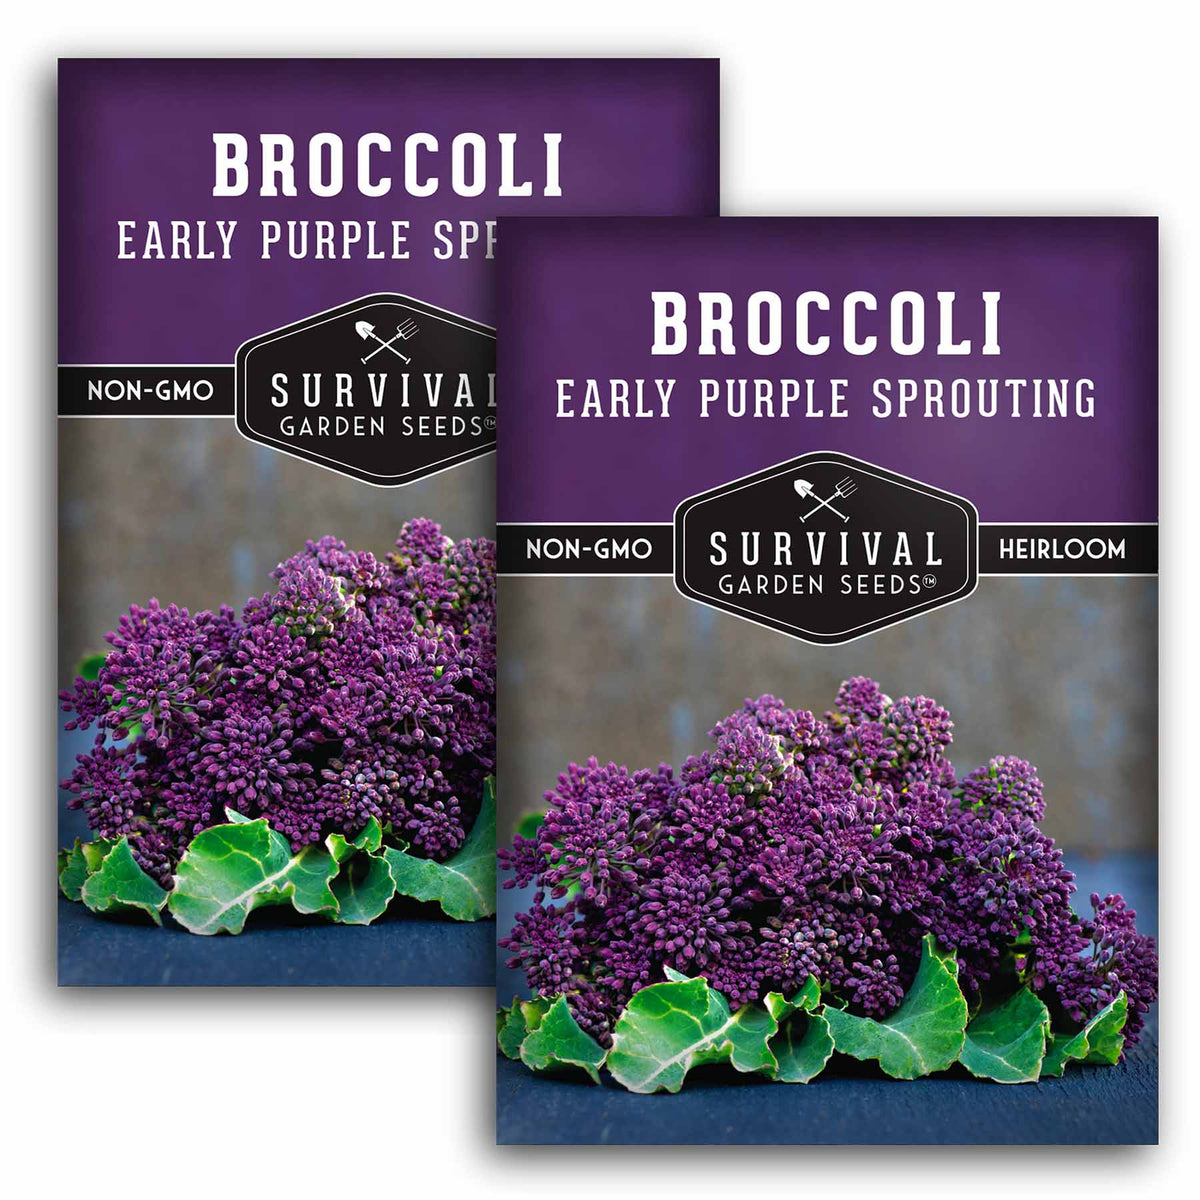 2 packets of Early Purple Sprouting Broccoli seeds